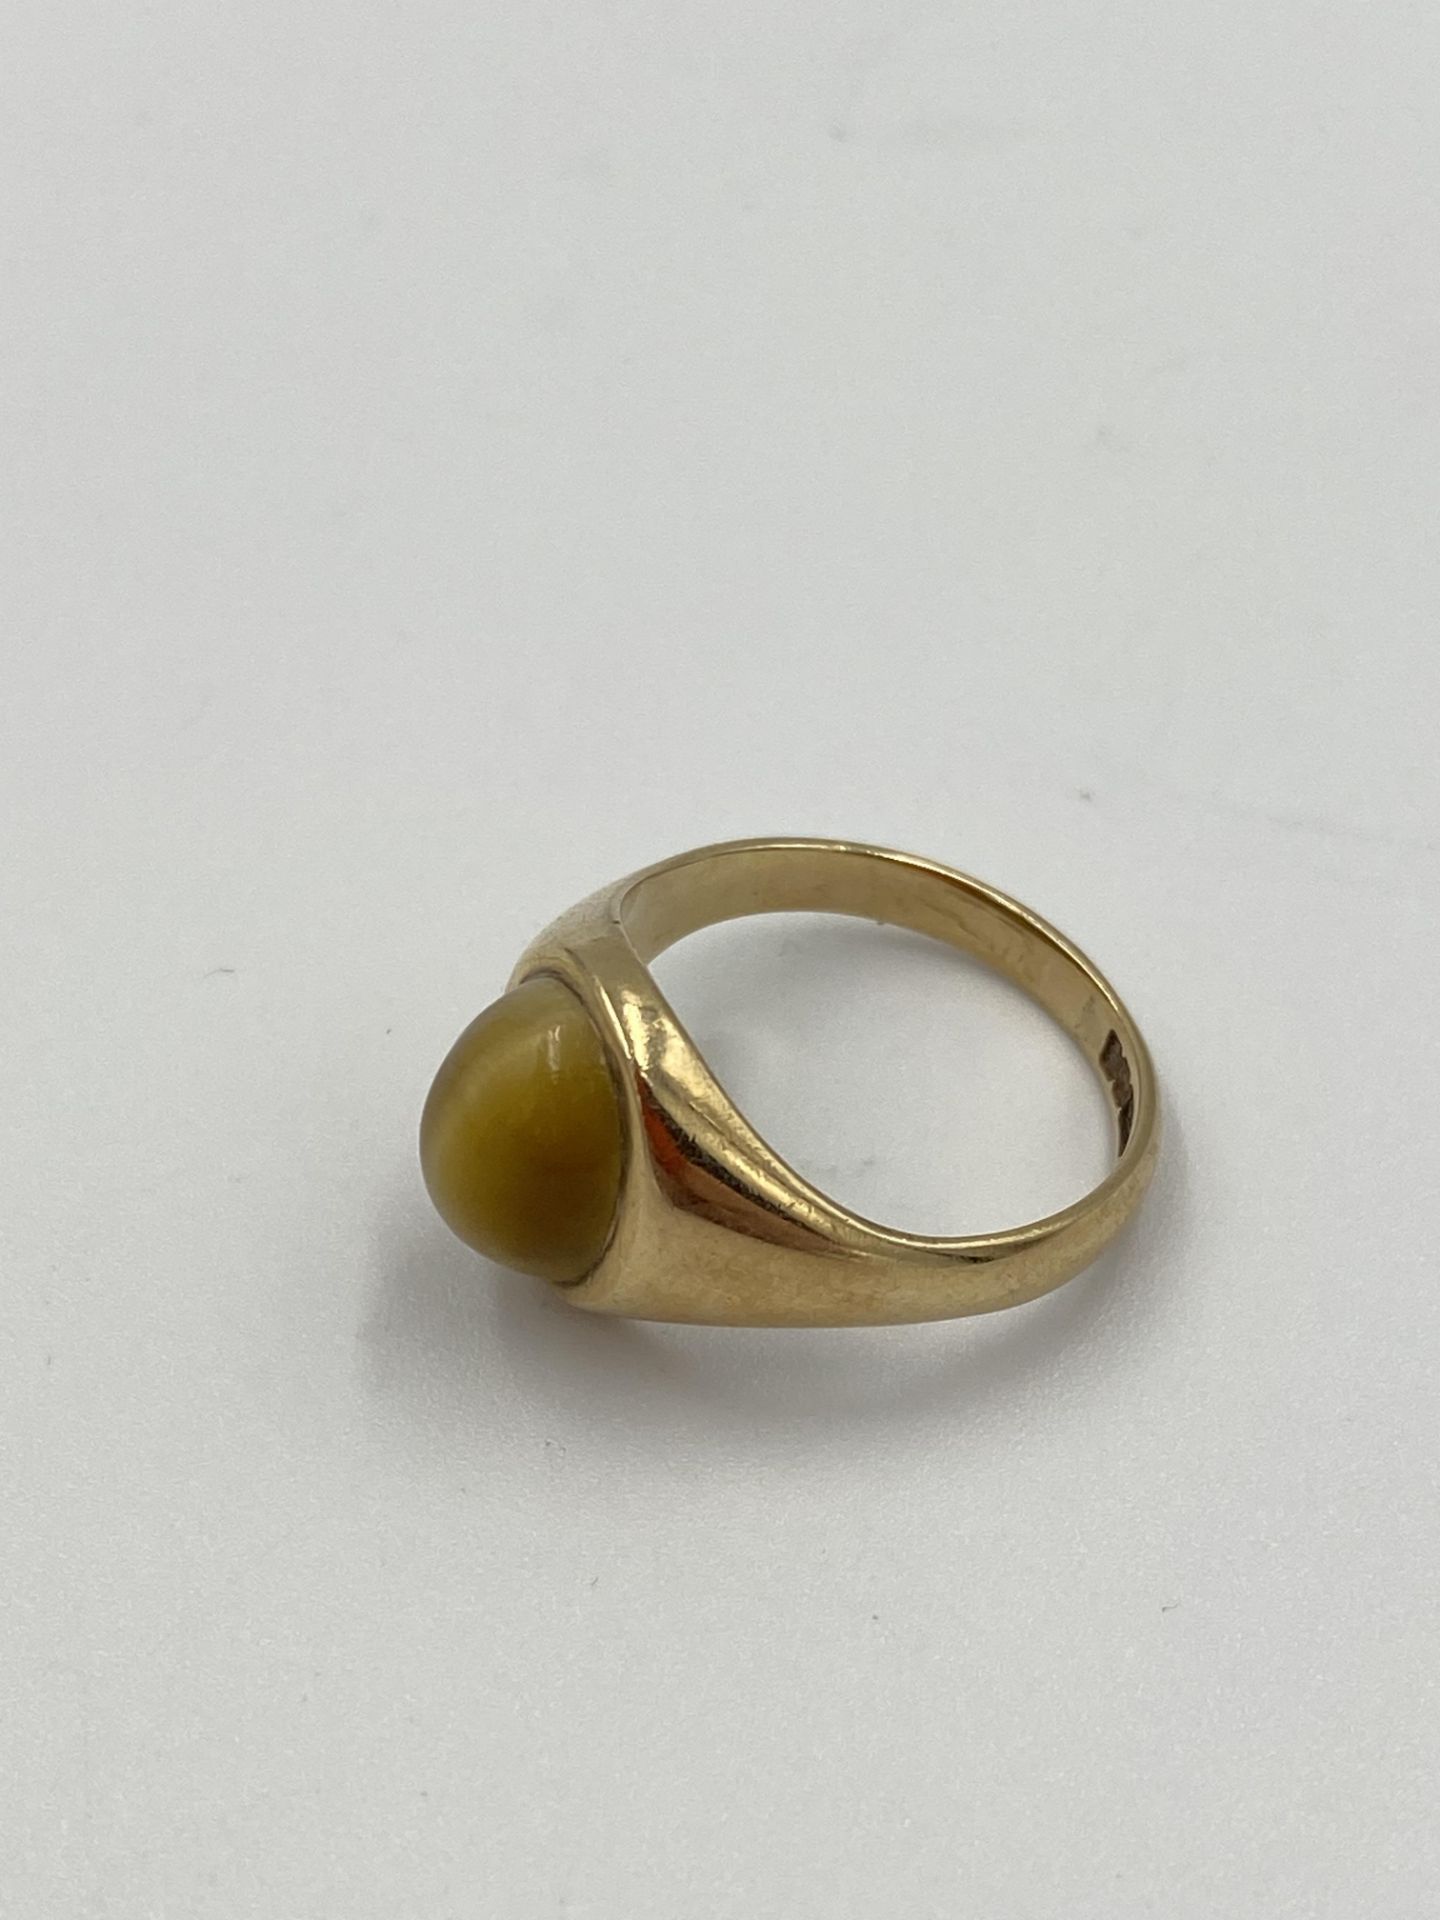 9ct gold and agate ring - Image 2 of 4